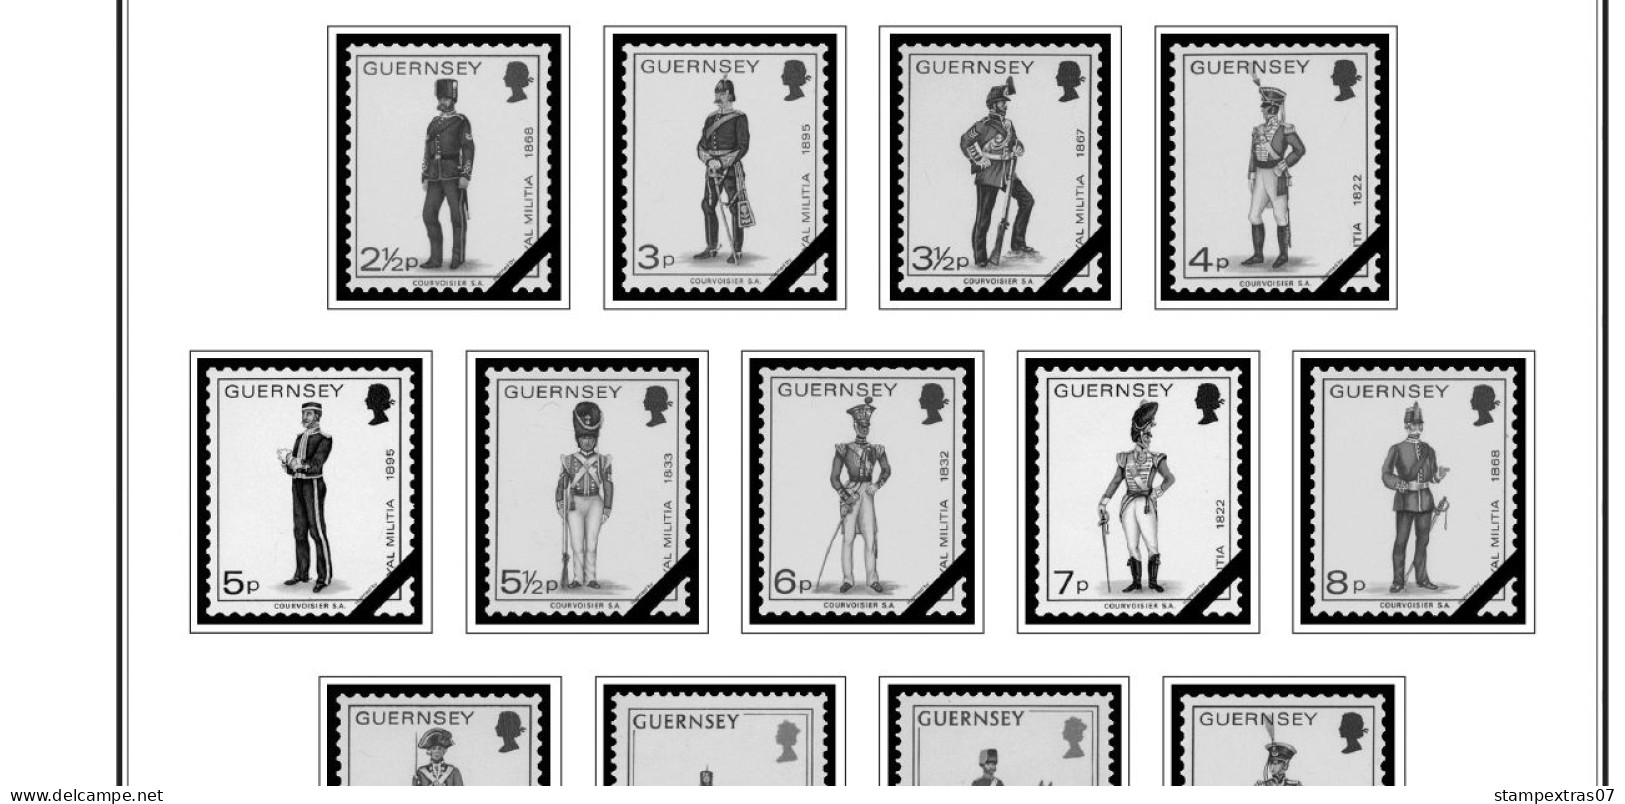 GB GUERNSEY 1958-2010 + 2011- 2020 STAMP ALBUM PAGES (212 B&w Illustrated Pages) - Engels